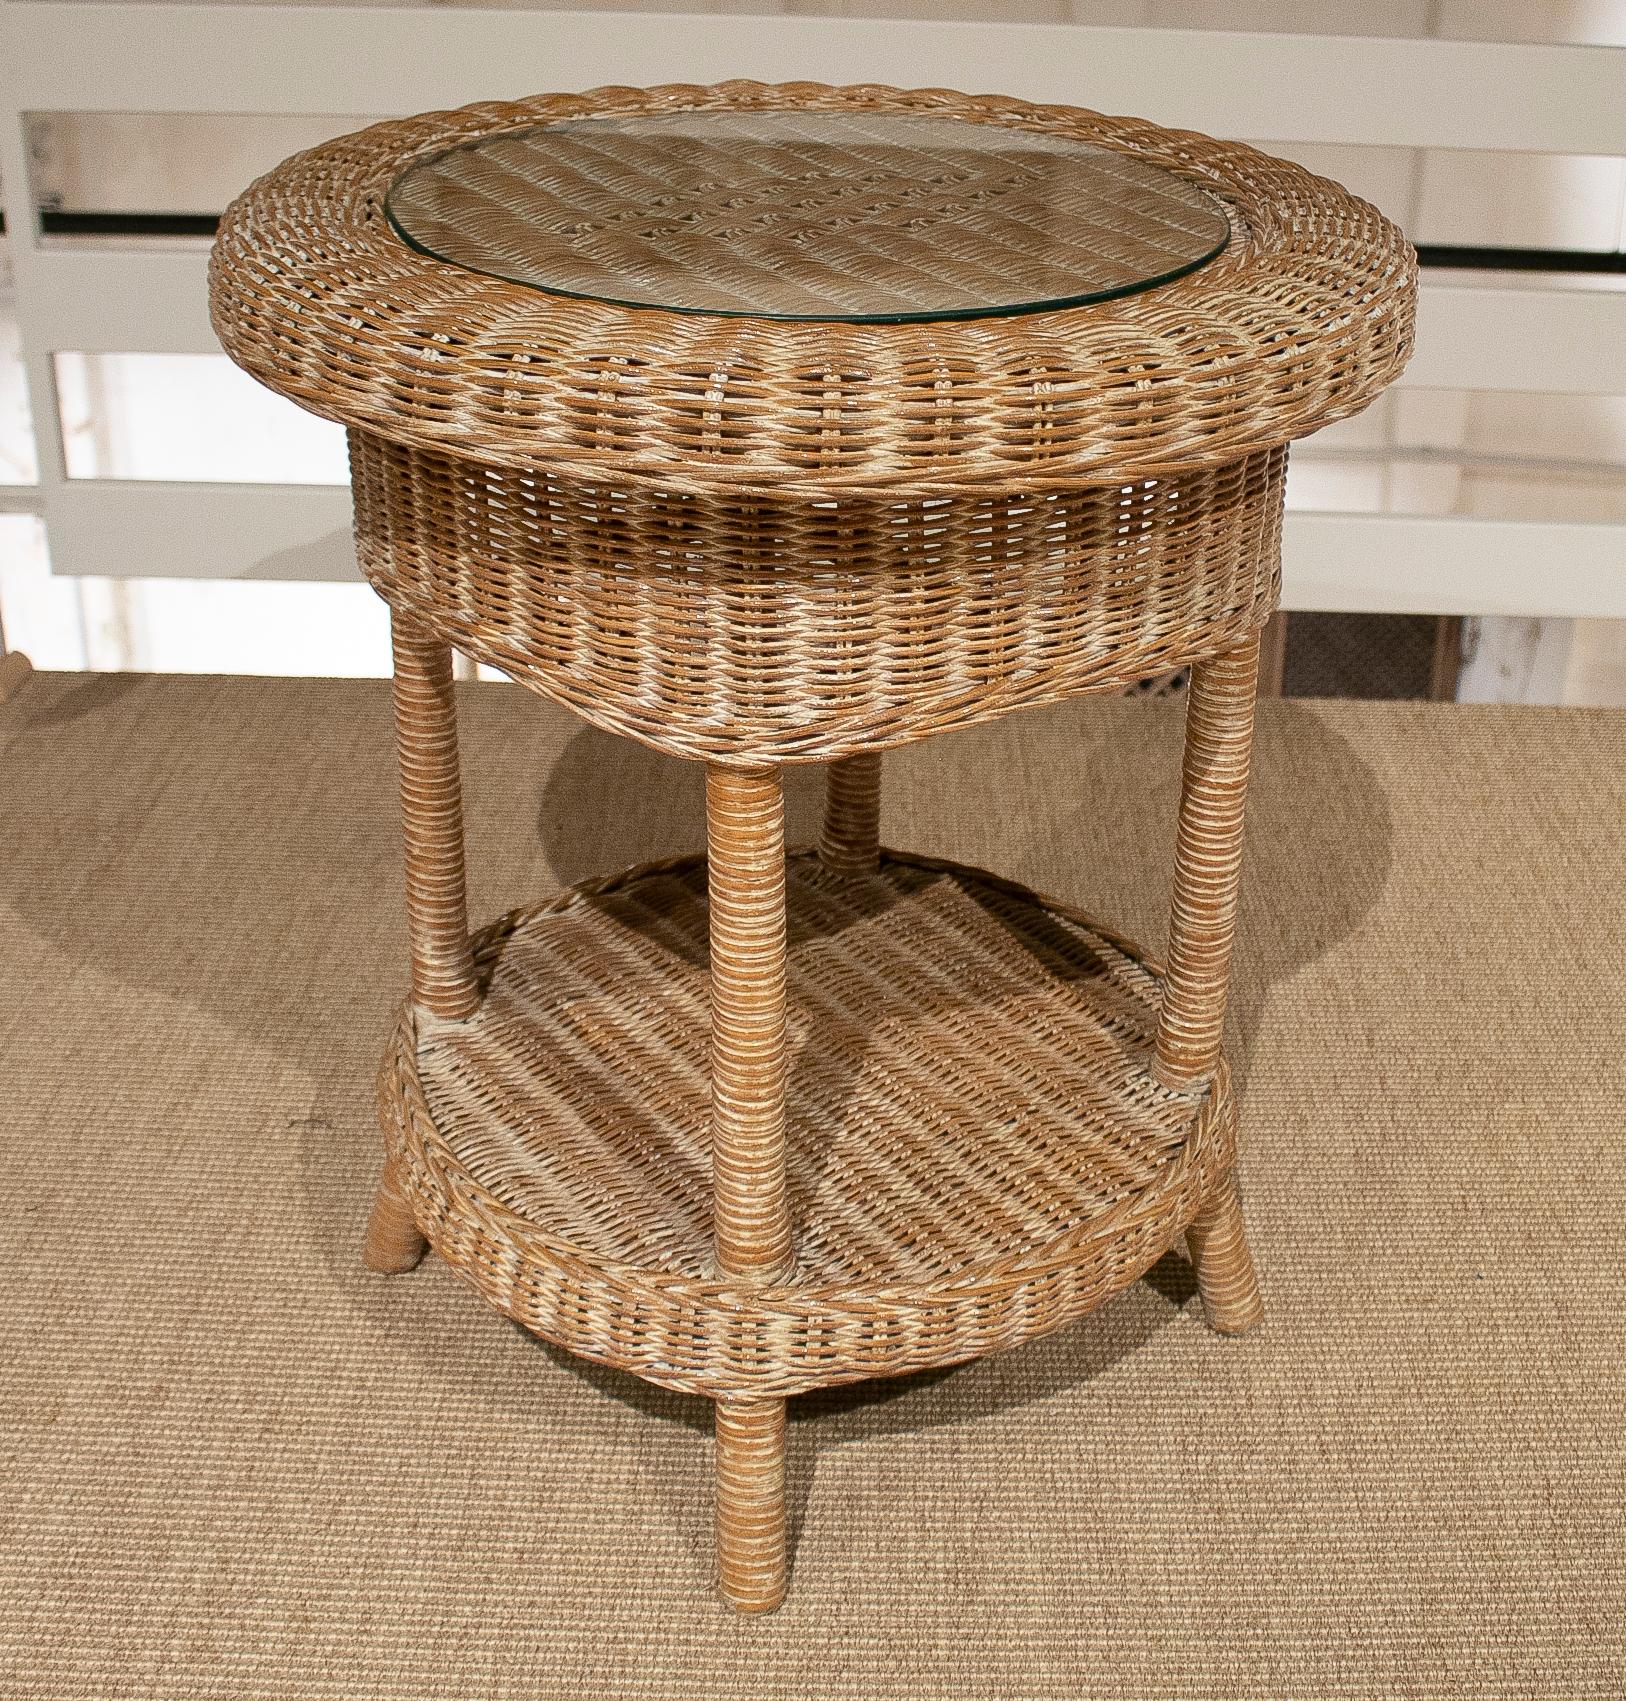 Vintage 1980s Spanish round hand woven wicker side table with glass top.